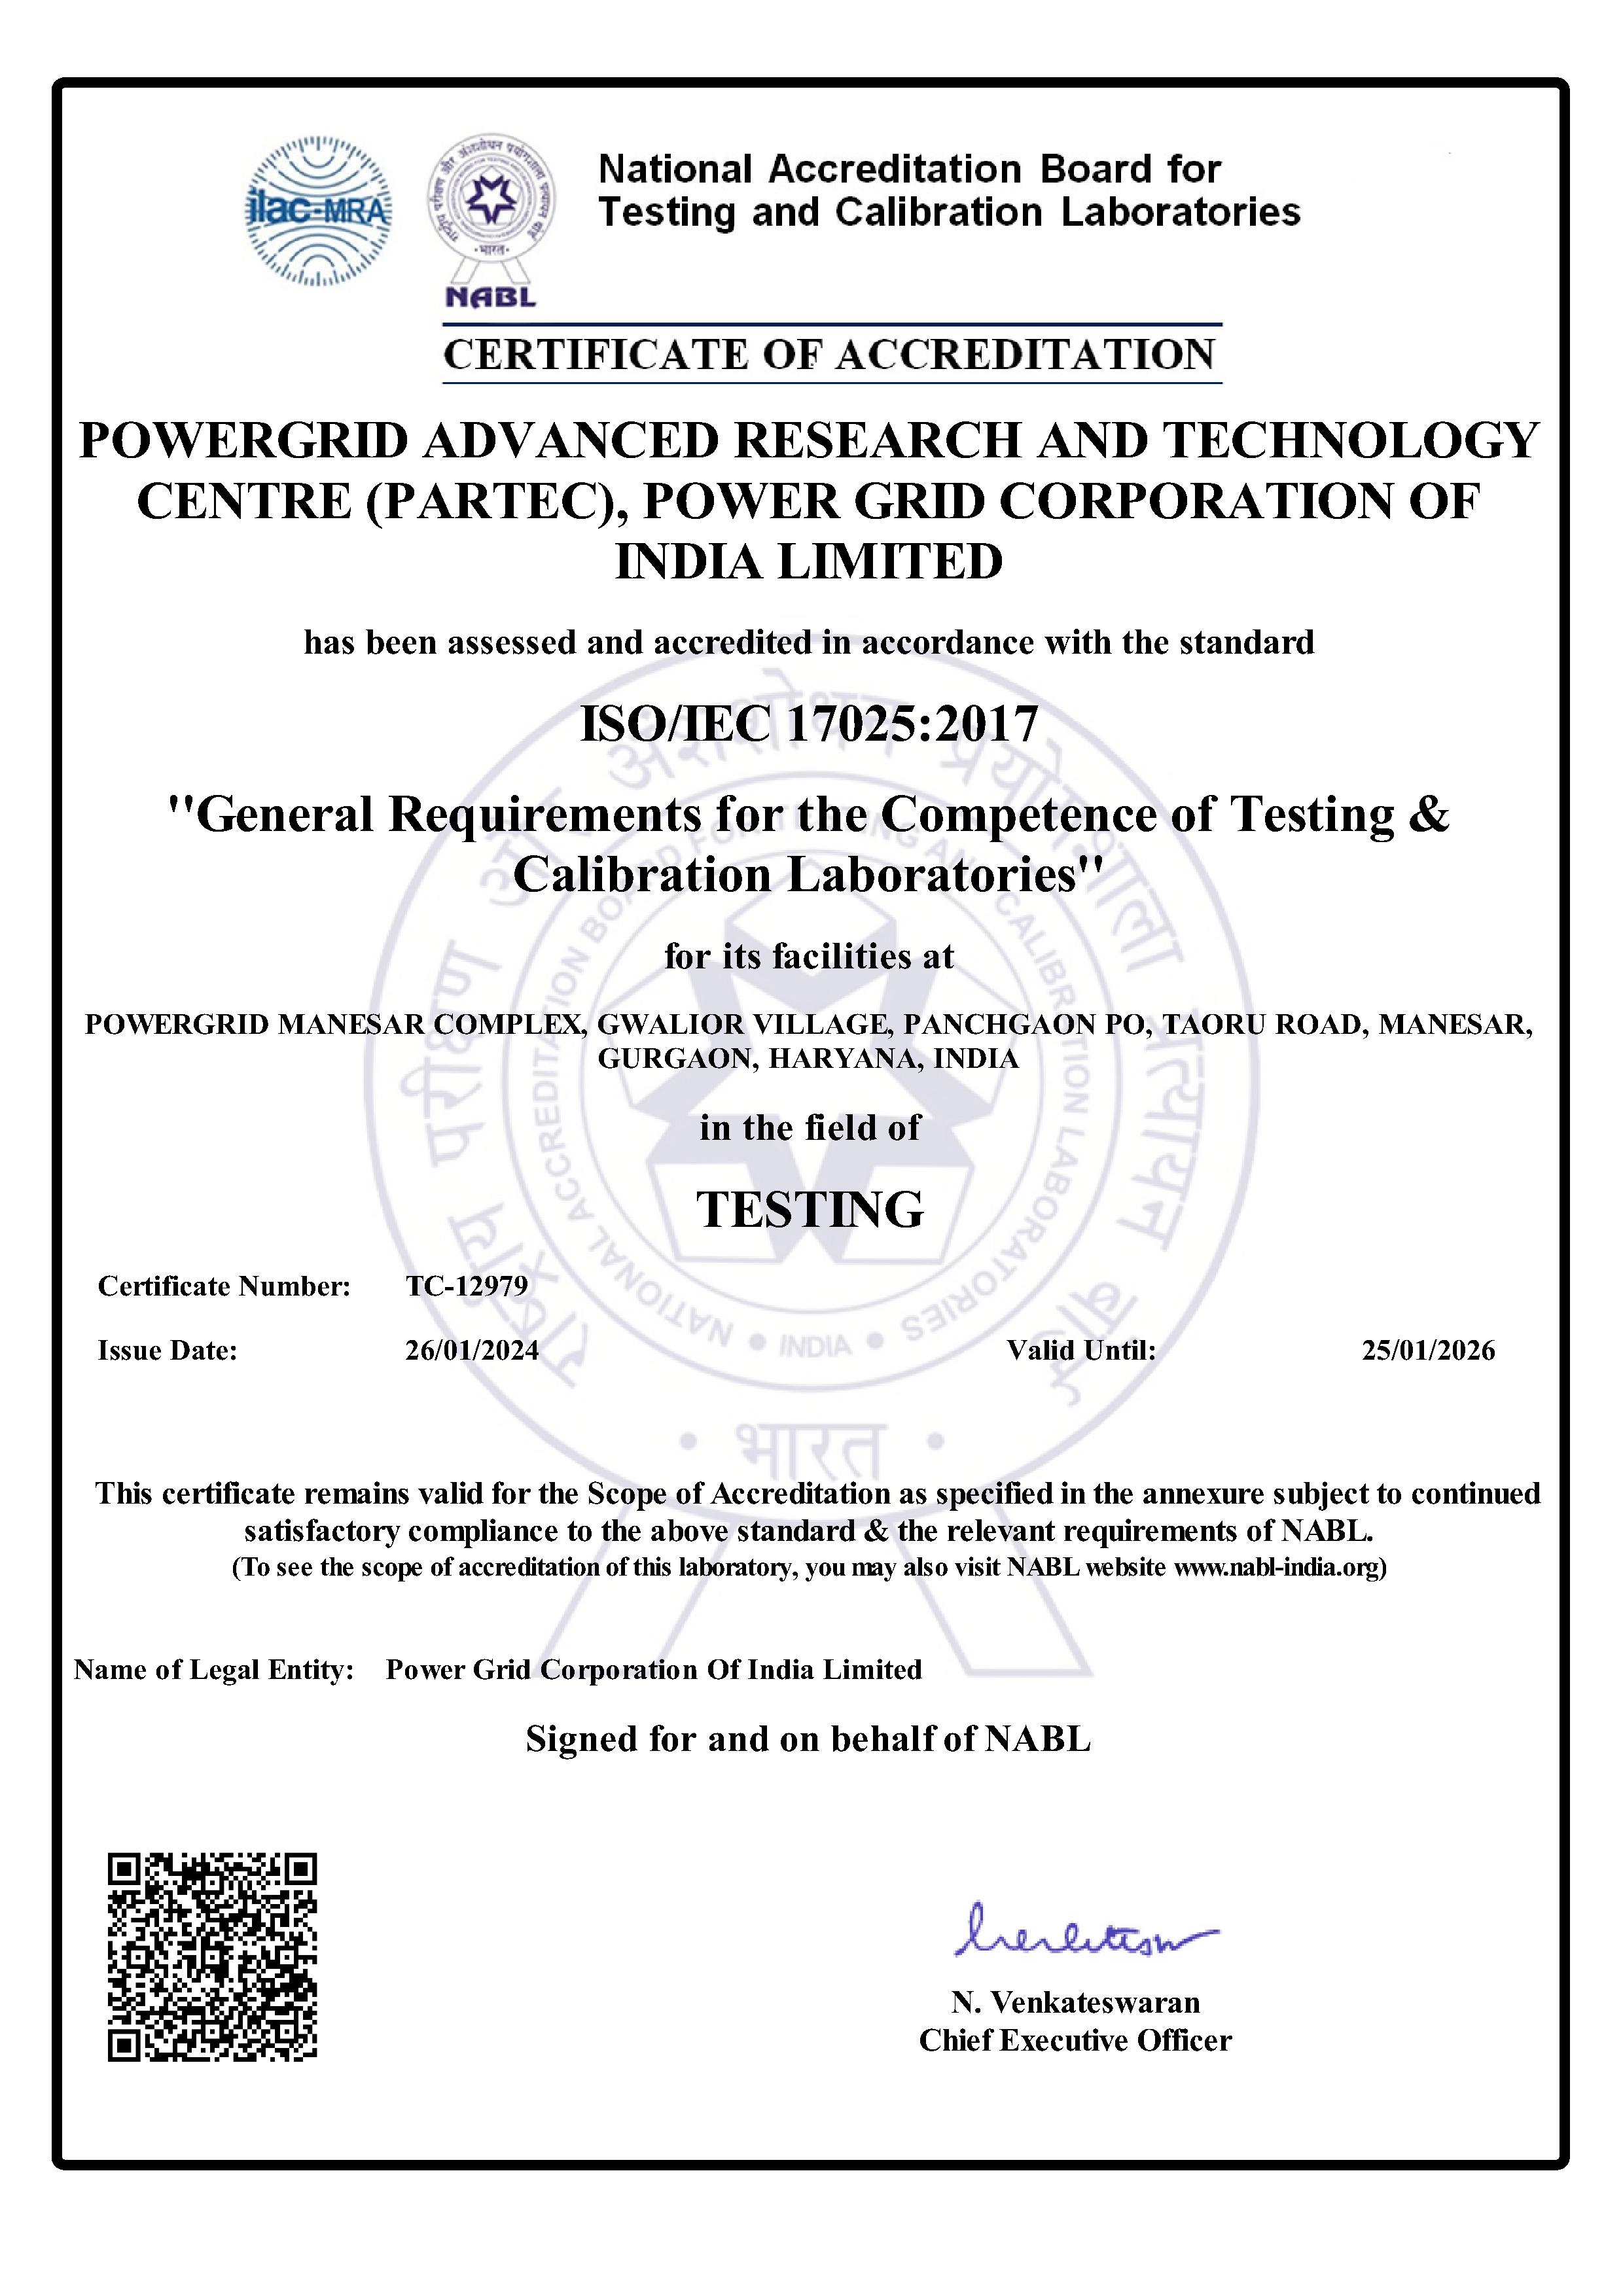 NABL accreditation received for PARTeC for testing and calibration